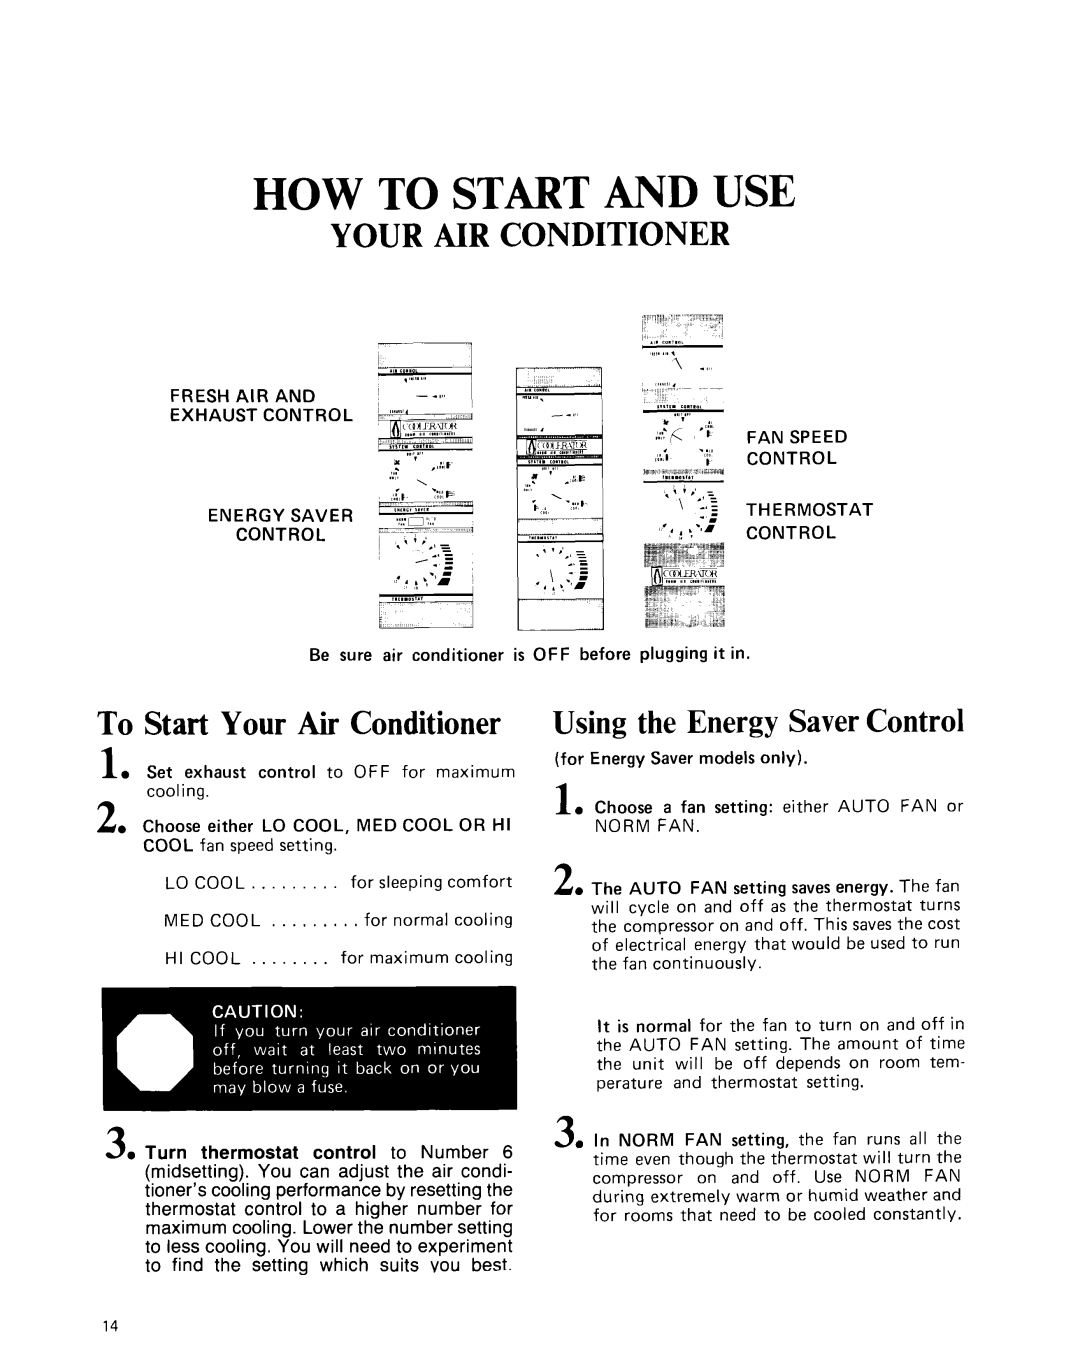 Whirlpool CAW21D2A1 manual HOW TO STA 3T AND USE, Your Air C Nditioner, To Start Your Air Conditioner 